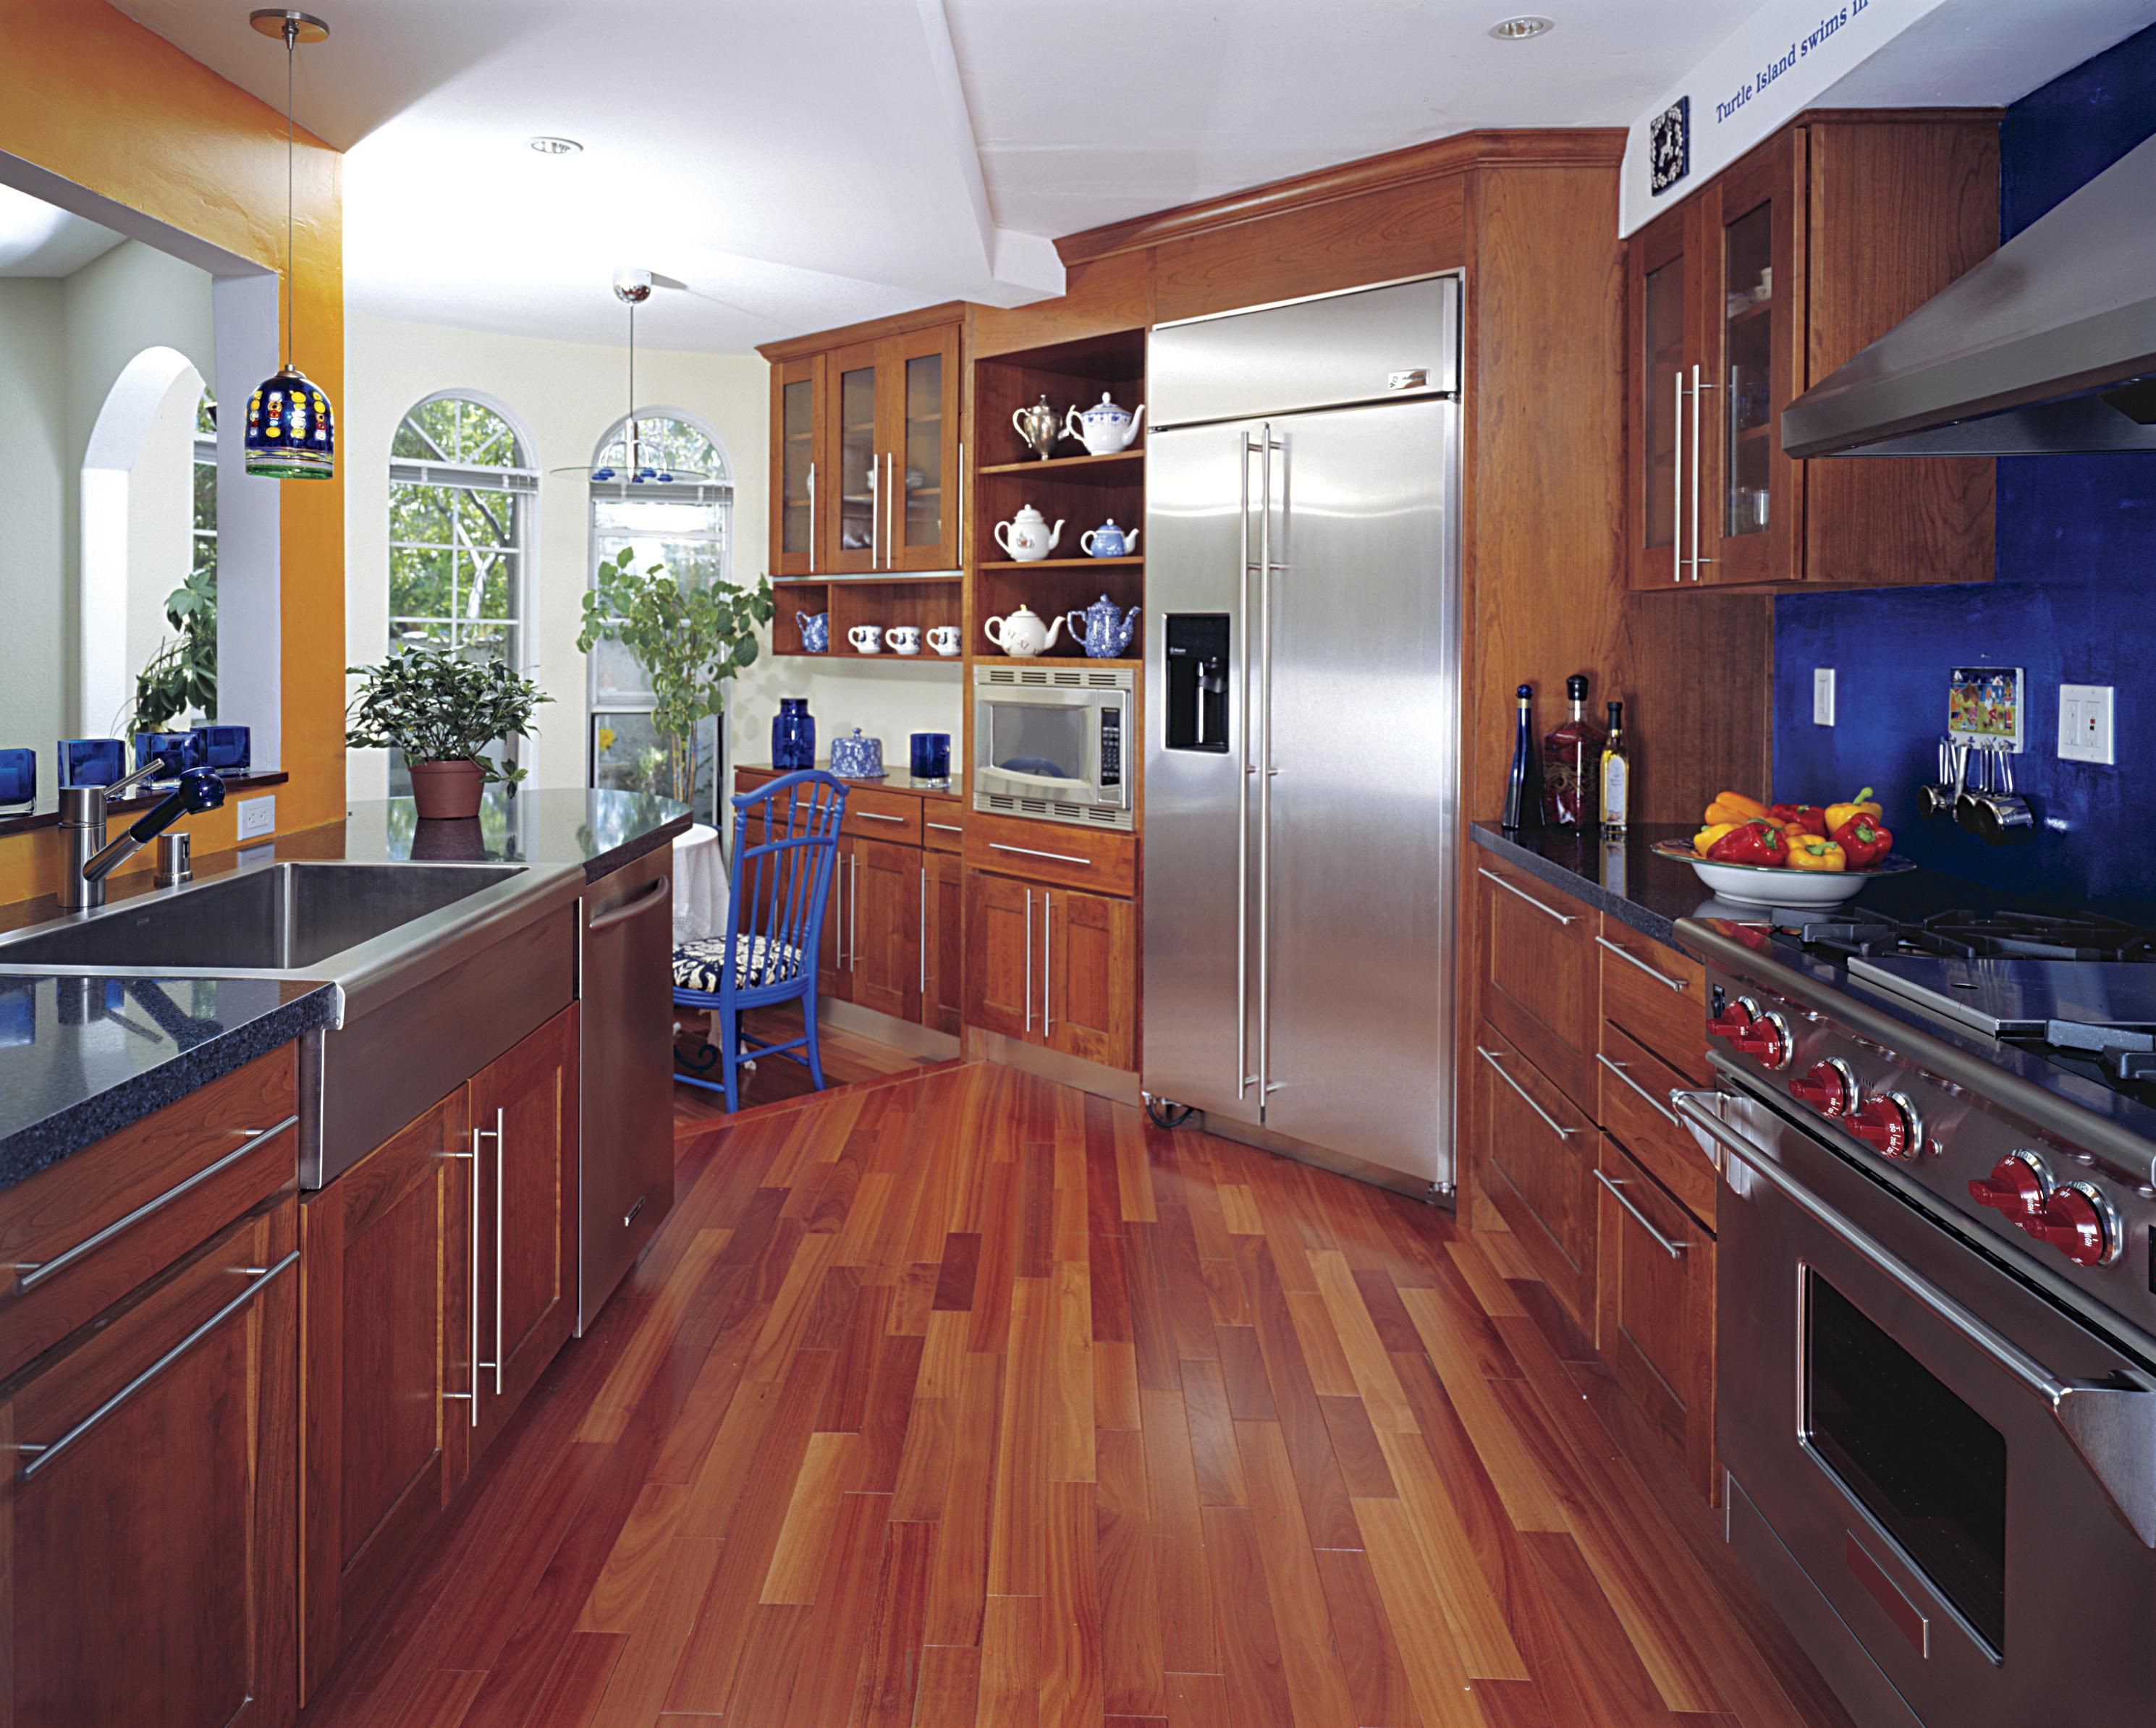 29 Nice How to Protect Hardwood Floors In Kitchen 2024 free download how to protect hardwood floors in kitchen of hardwood floor in a kitchen is this allowed regarding 186828472 56a49f3a5f9b58b7d0d7e142